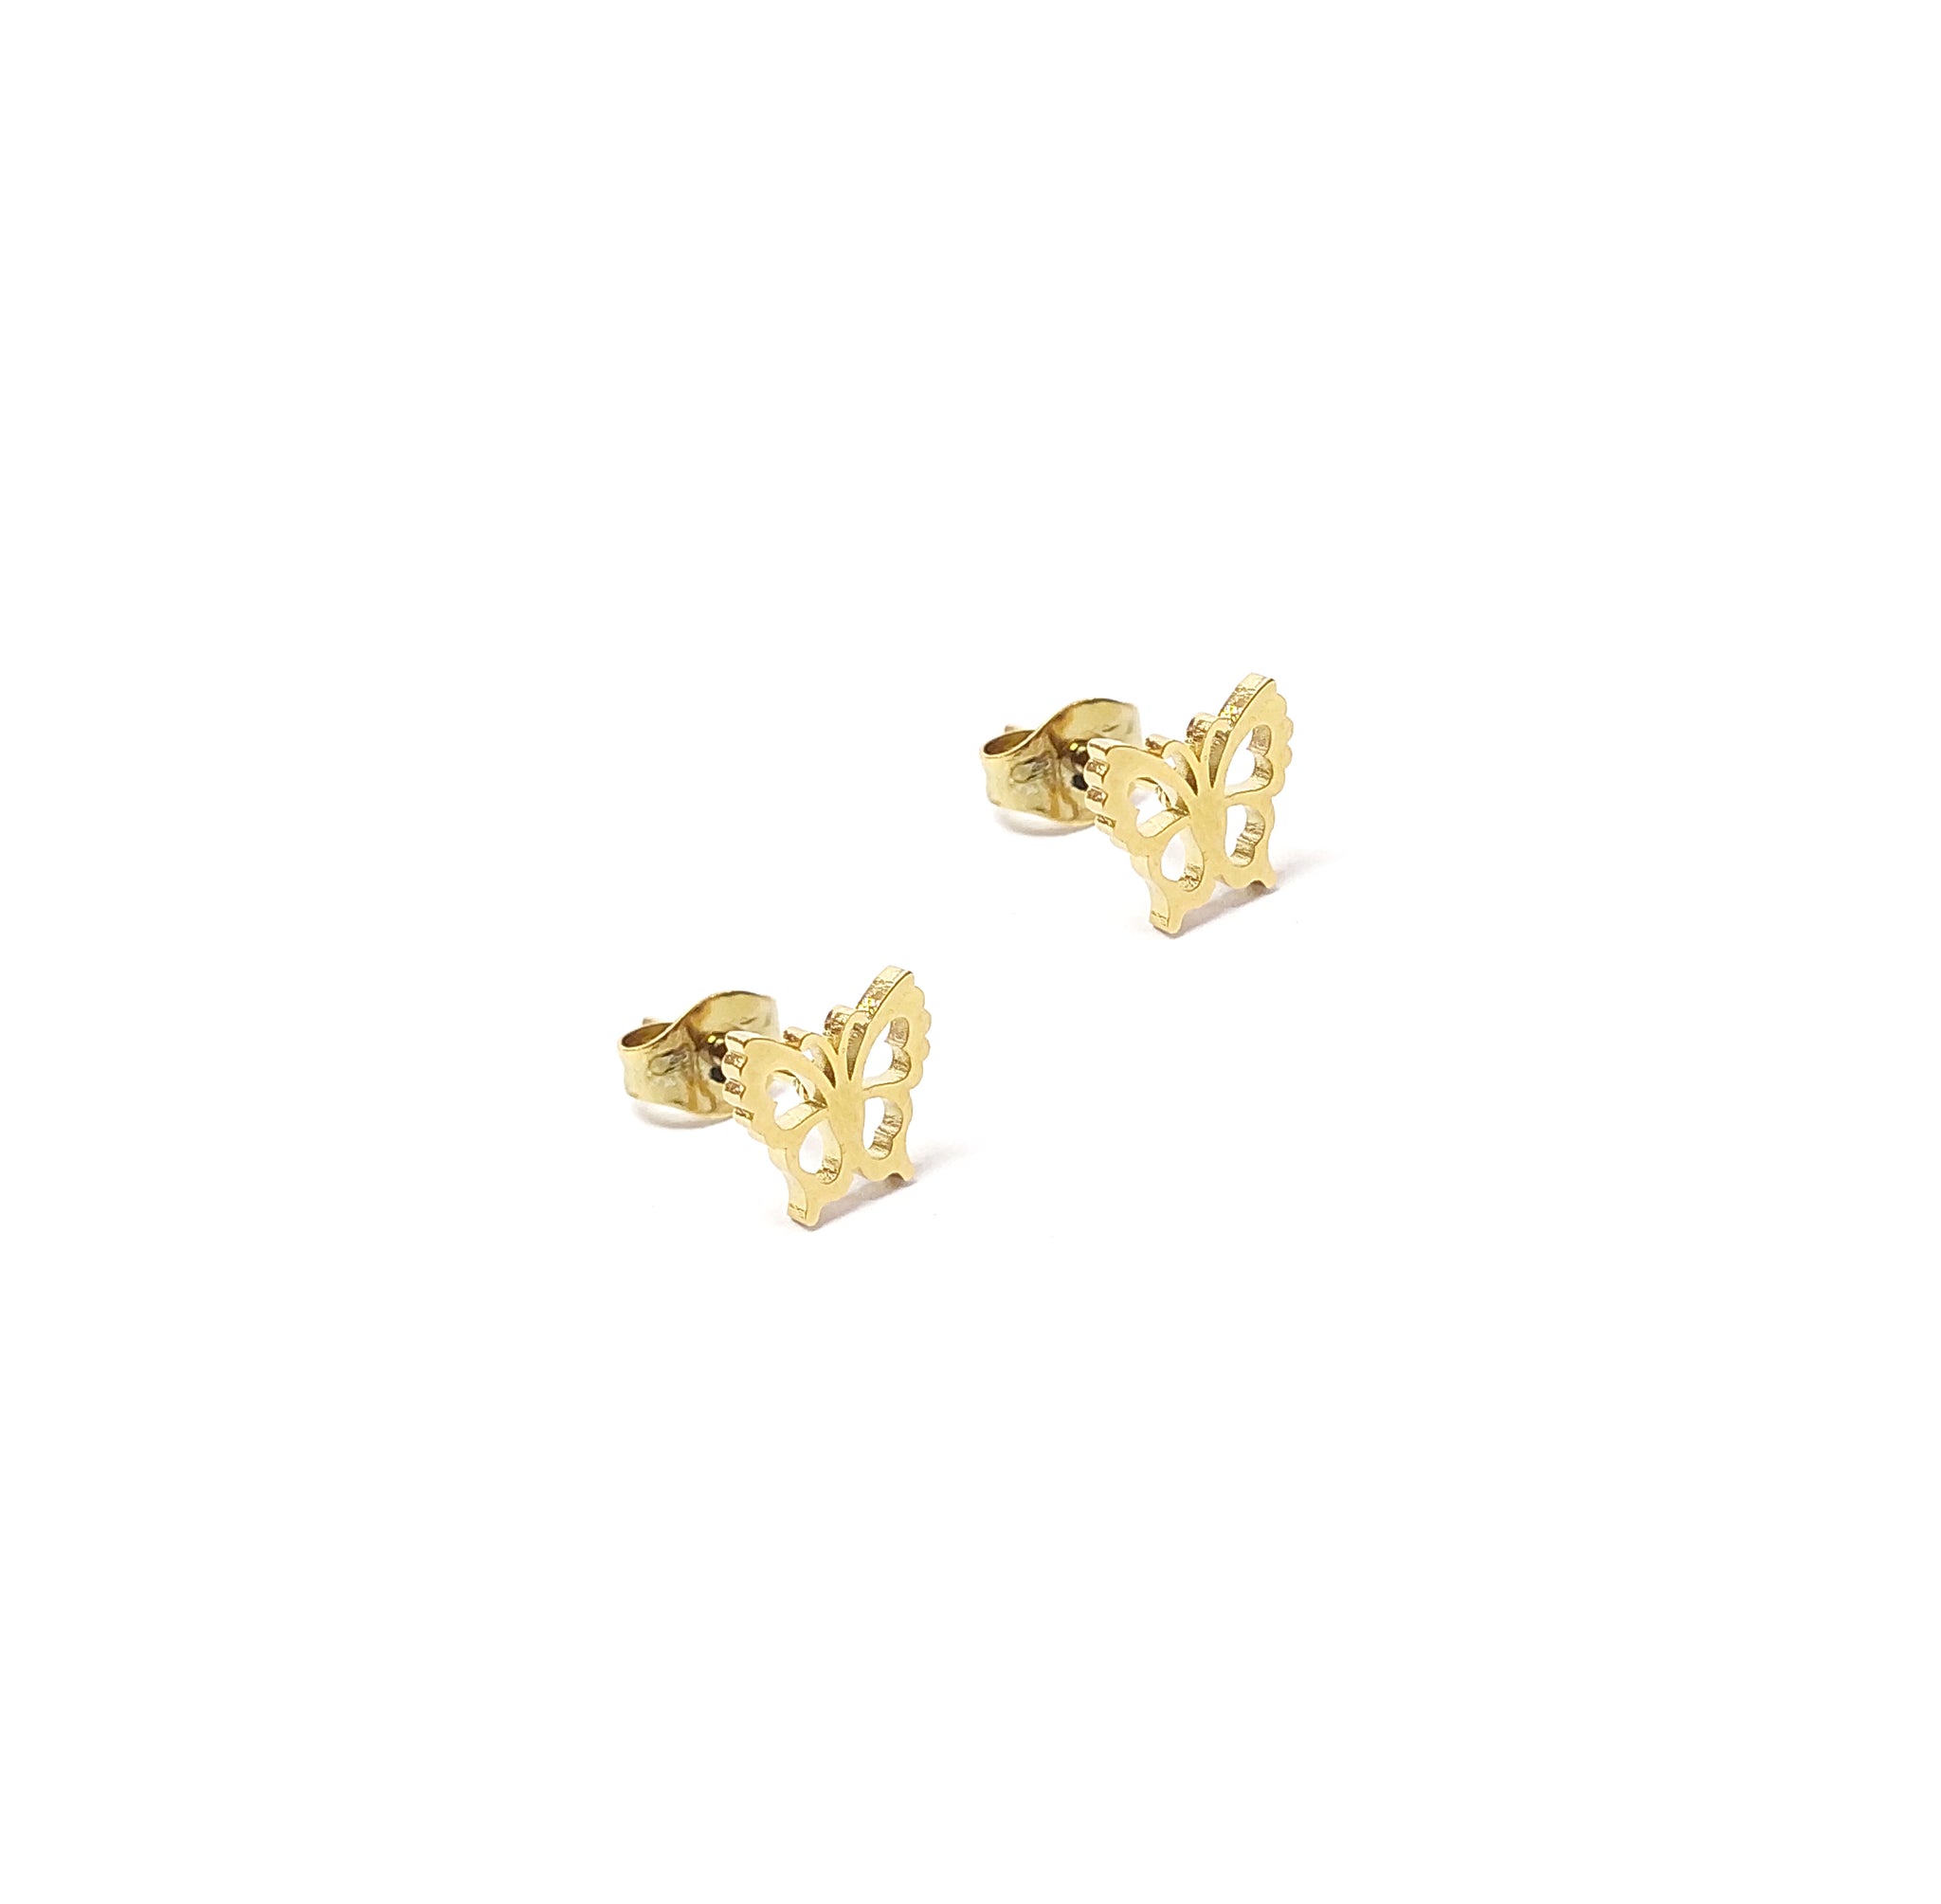 ESE 7911: All IPG 6-Pc (2x Cz + 4x Butterfly Sm-Big ) Studs Set